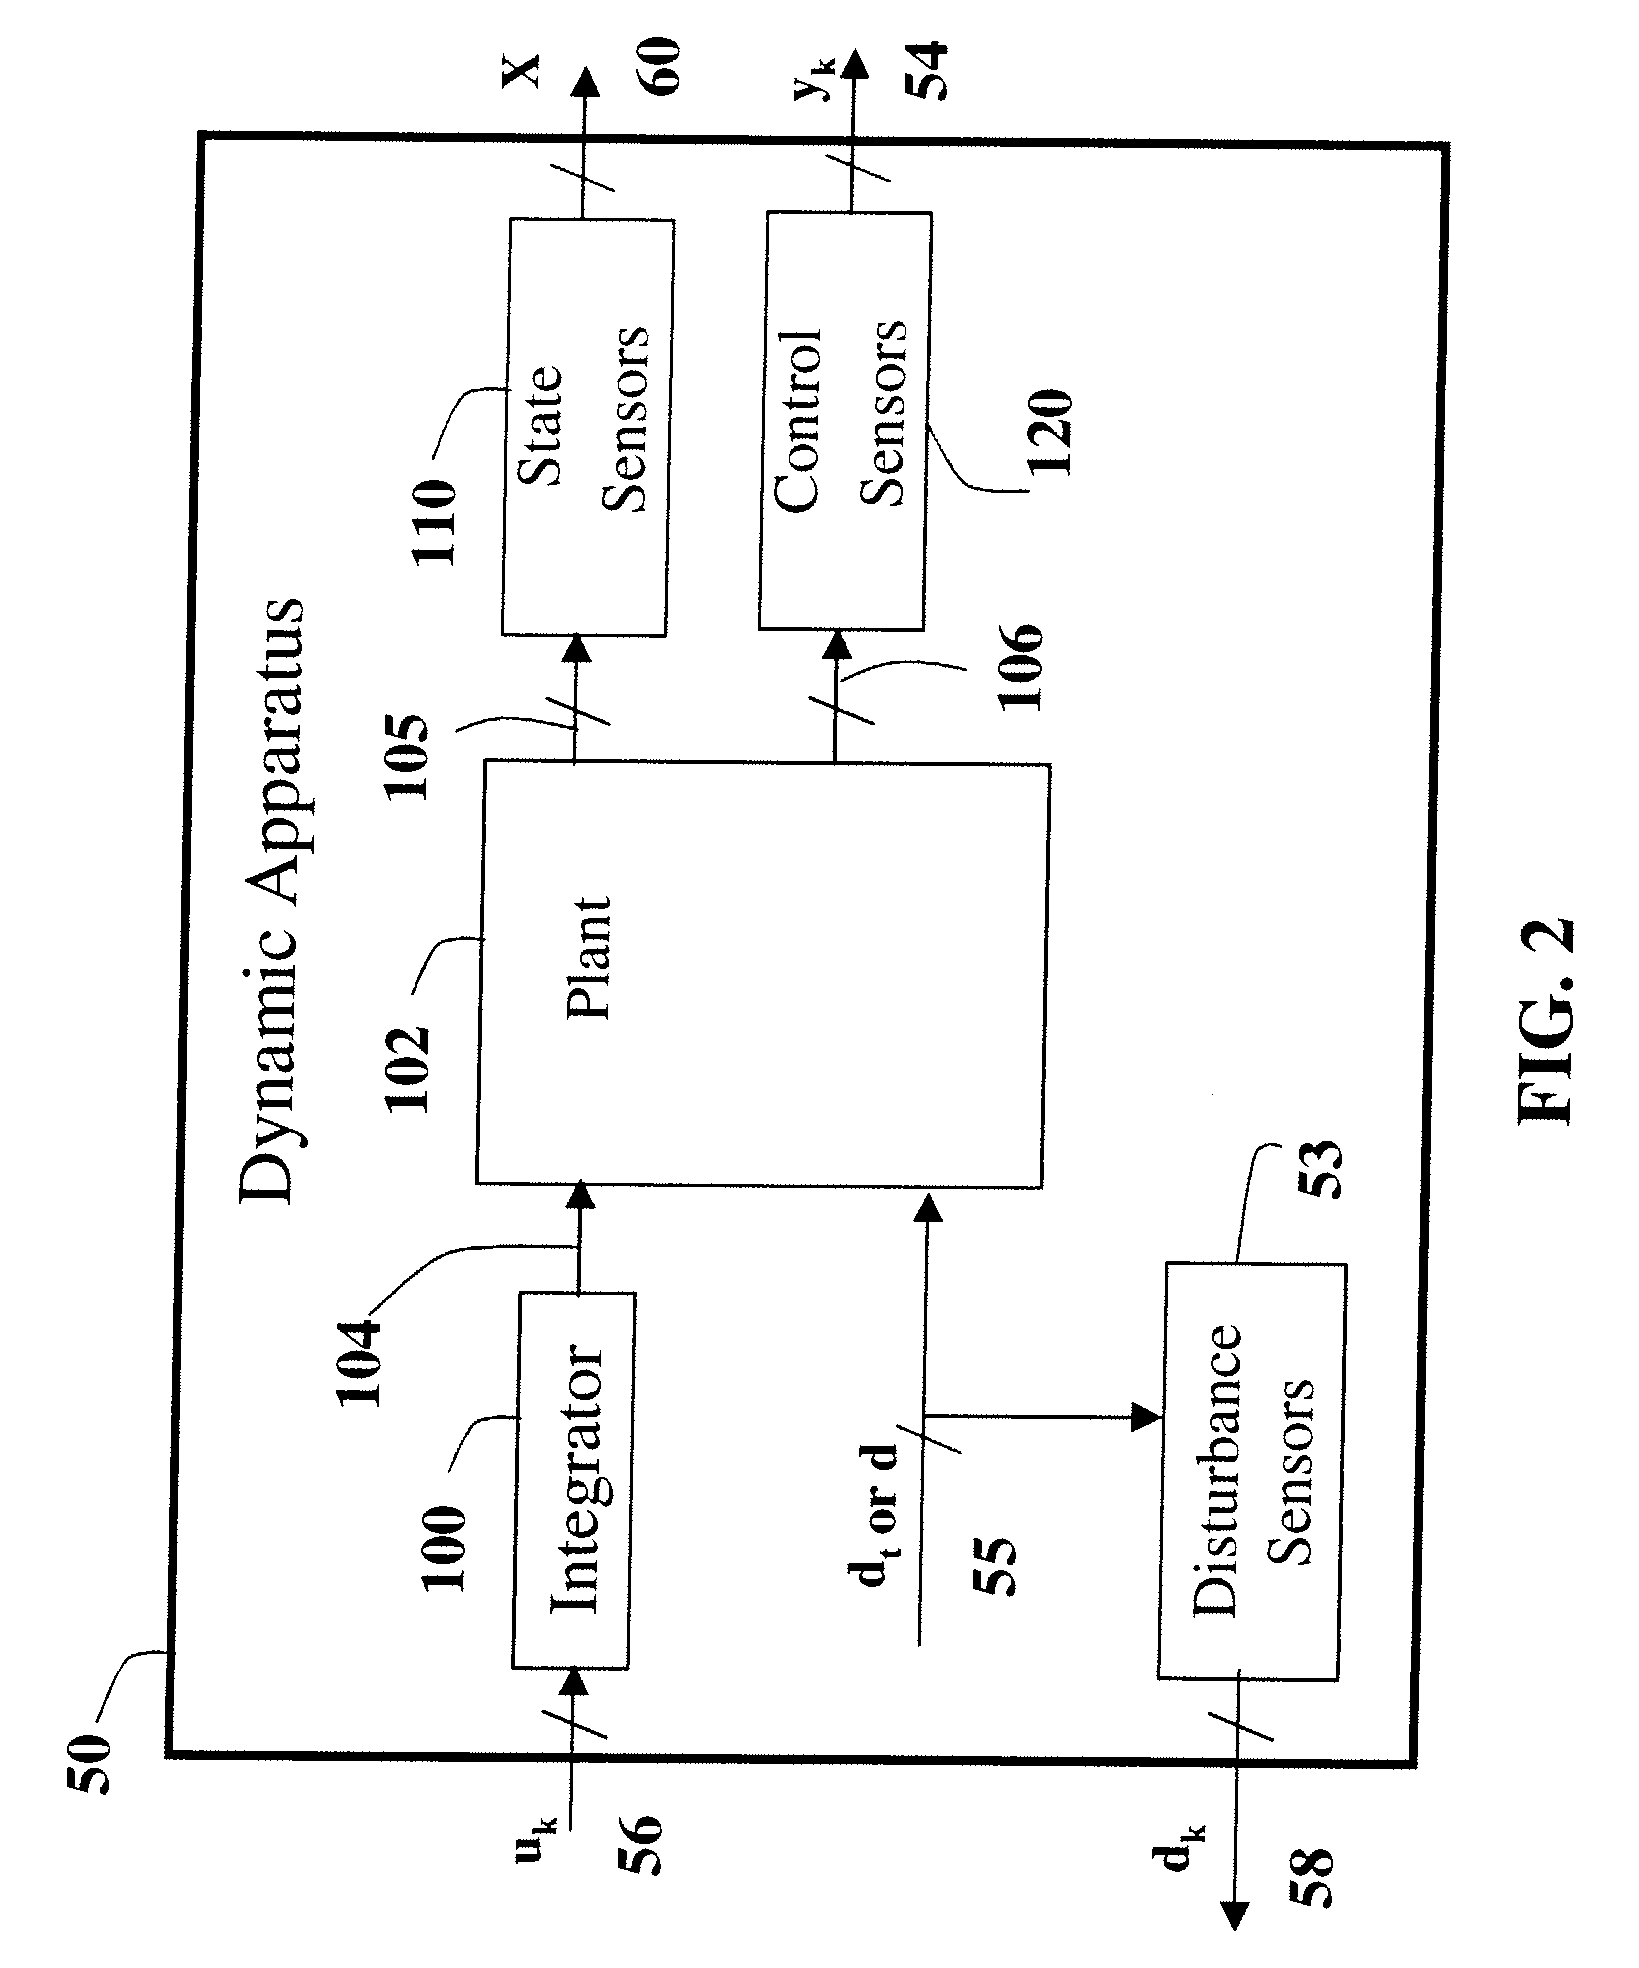 System and methods for reducing an effect of a disturbance